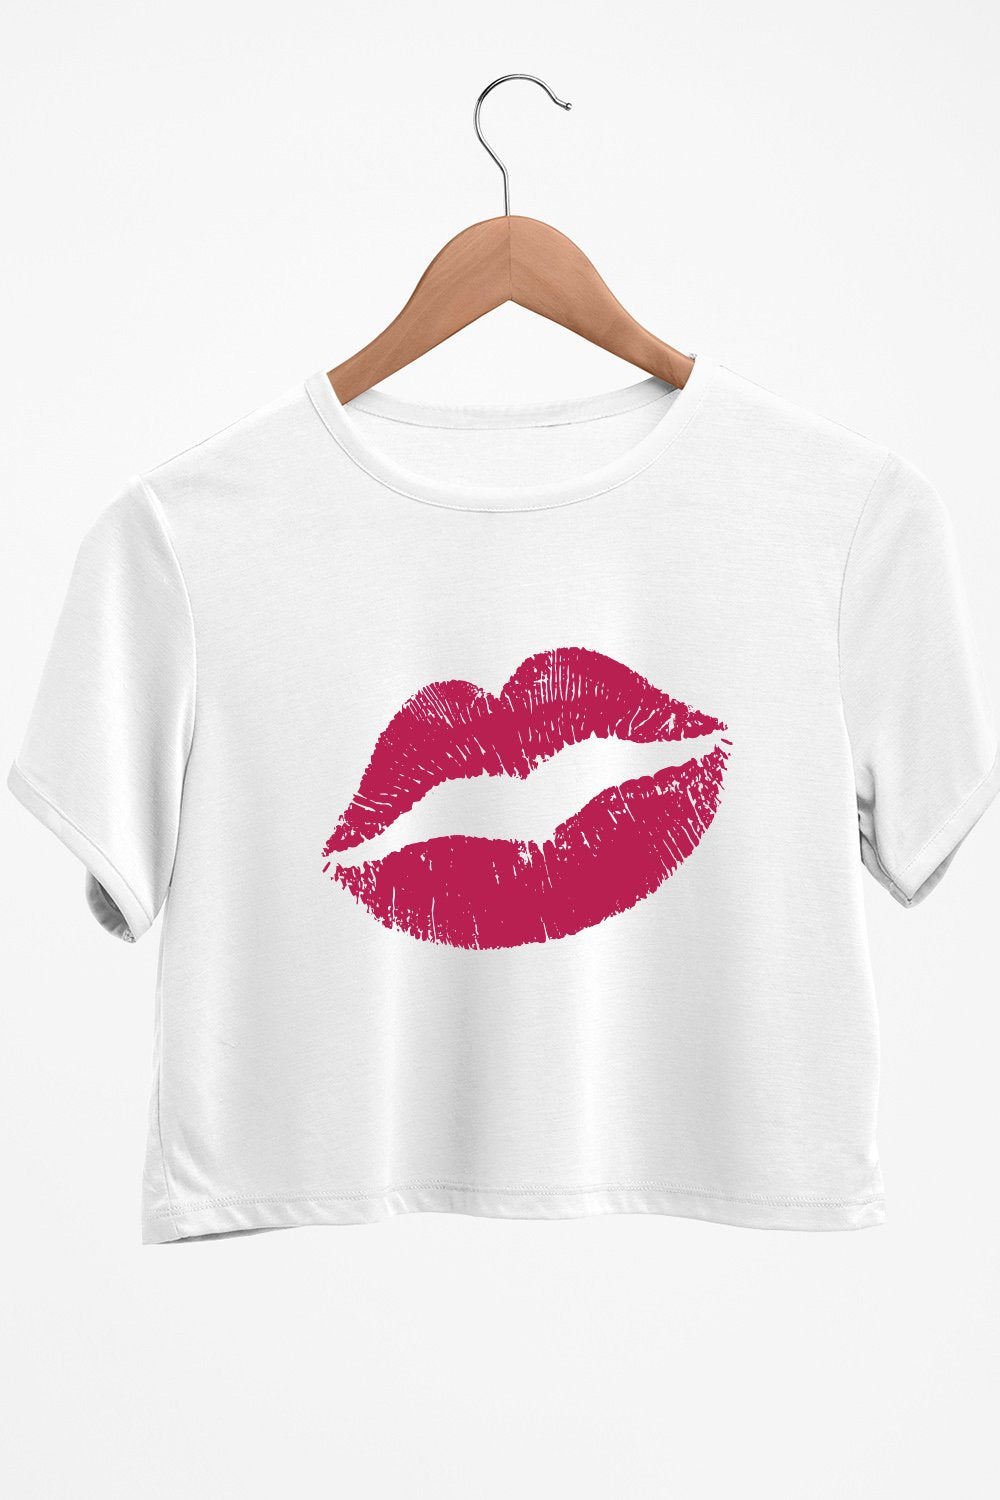 Red Lip Graphic Printed White Crop Top